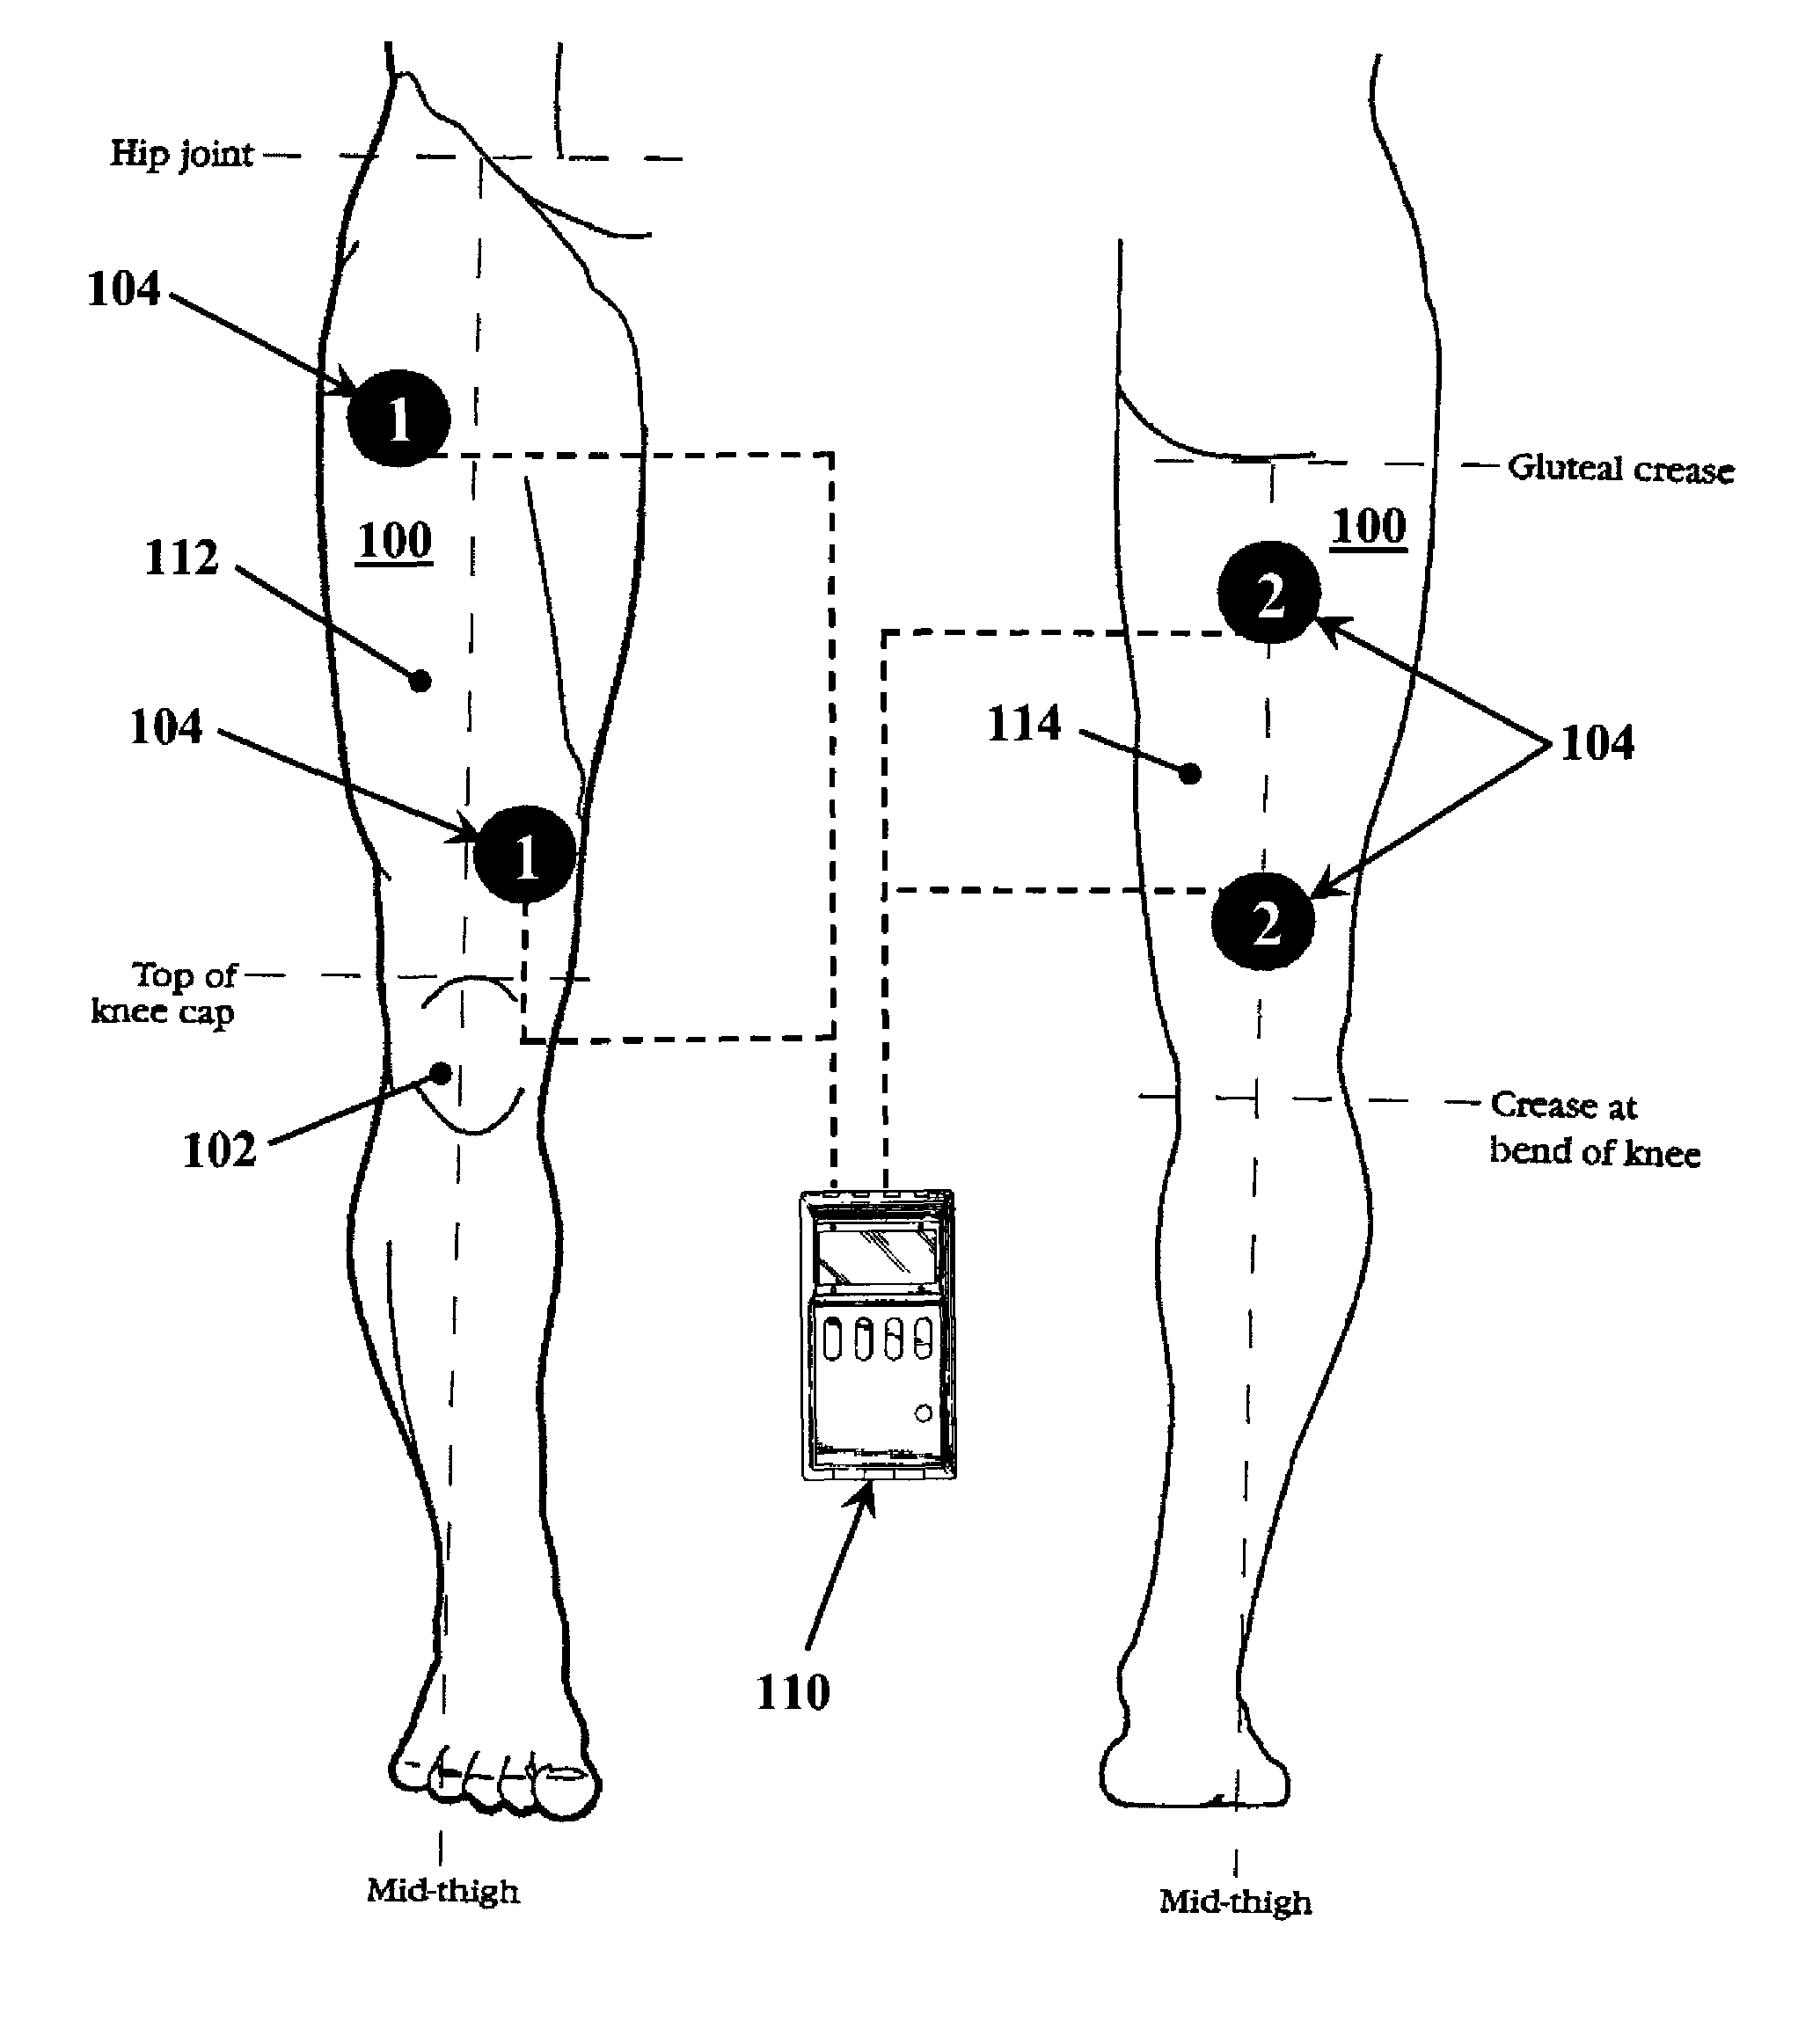 Methods for improving mobility and controlling cartilage matrix degradation of weight-bearing articular joints